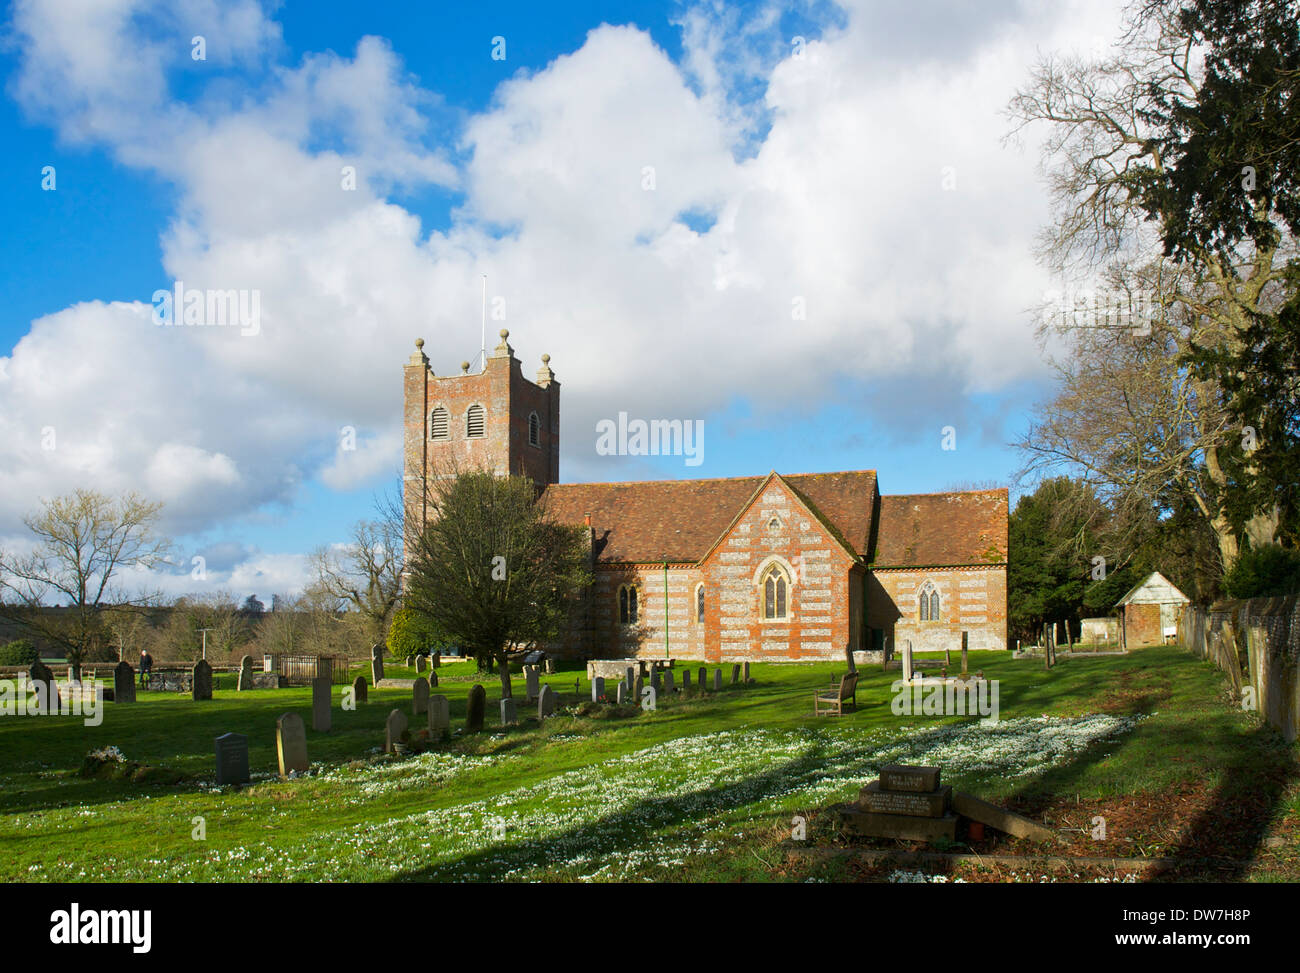 The church of St Mary the Virgin, Old Alresford, Hampshire, England UK Stock Photo